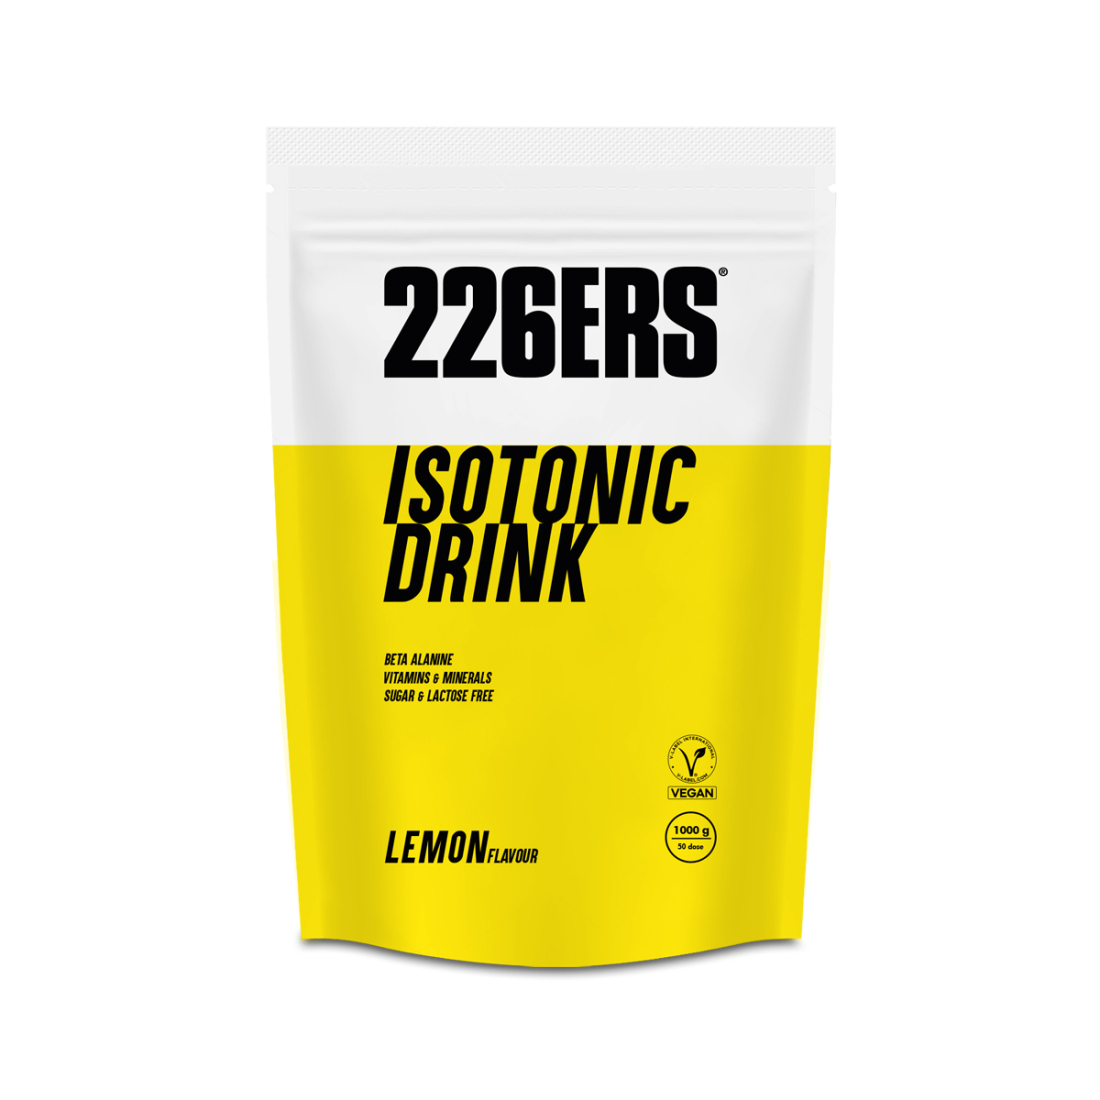 ISOTONIC DRINK - Isotonic Drink